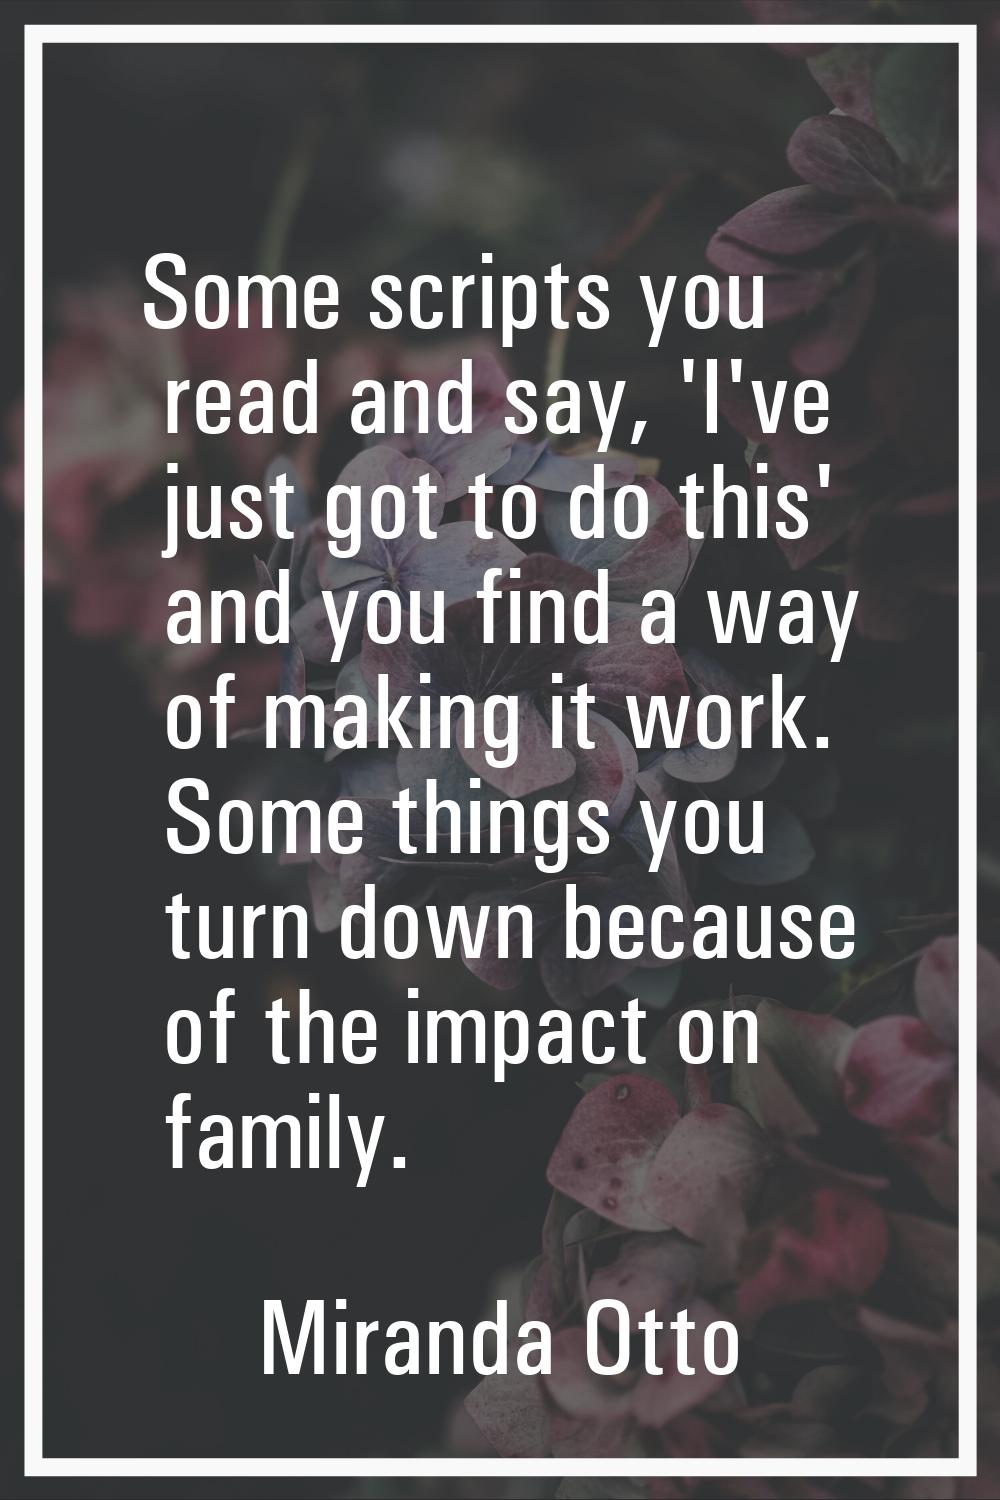 Some scripts you read and say, 'I've just got to do this' and you find a way of making it work. Som